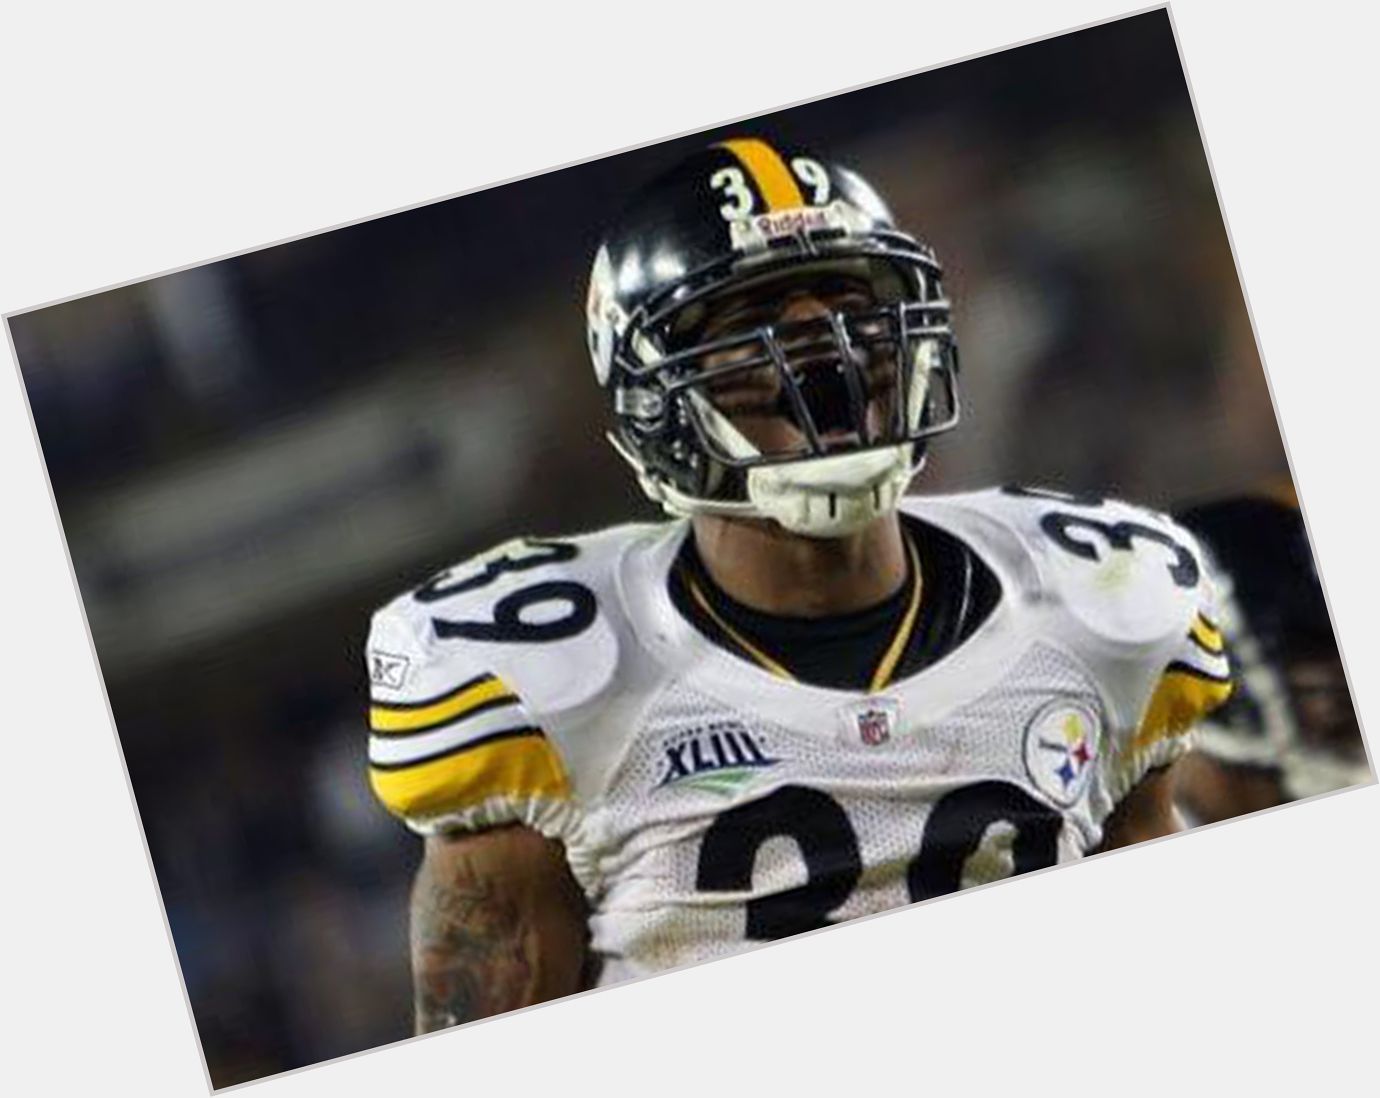 <a href="/hot-men/willie-parker/is-he-still-nfl-retired-playing-coming-back">Willie Parker</a> Athletic body,  